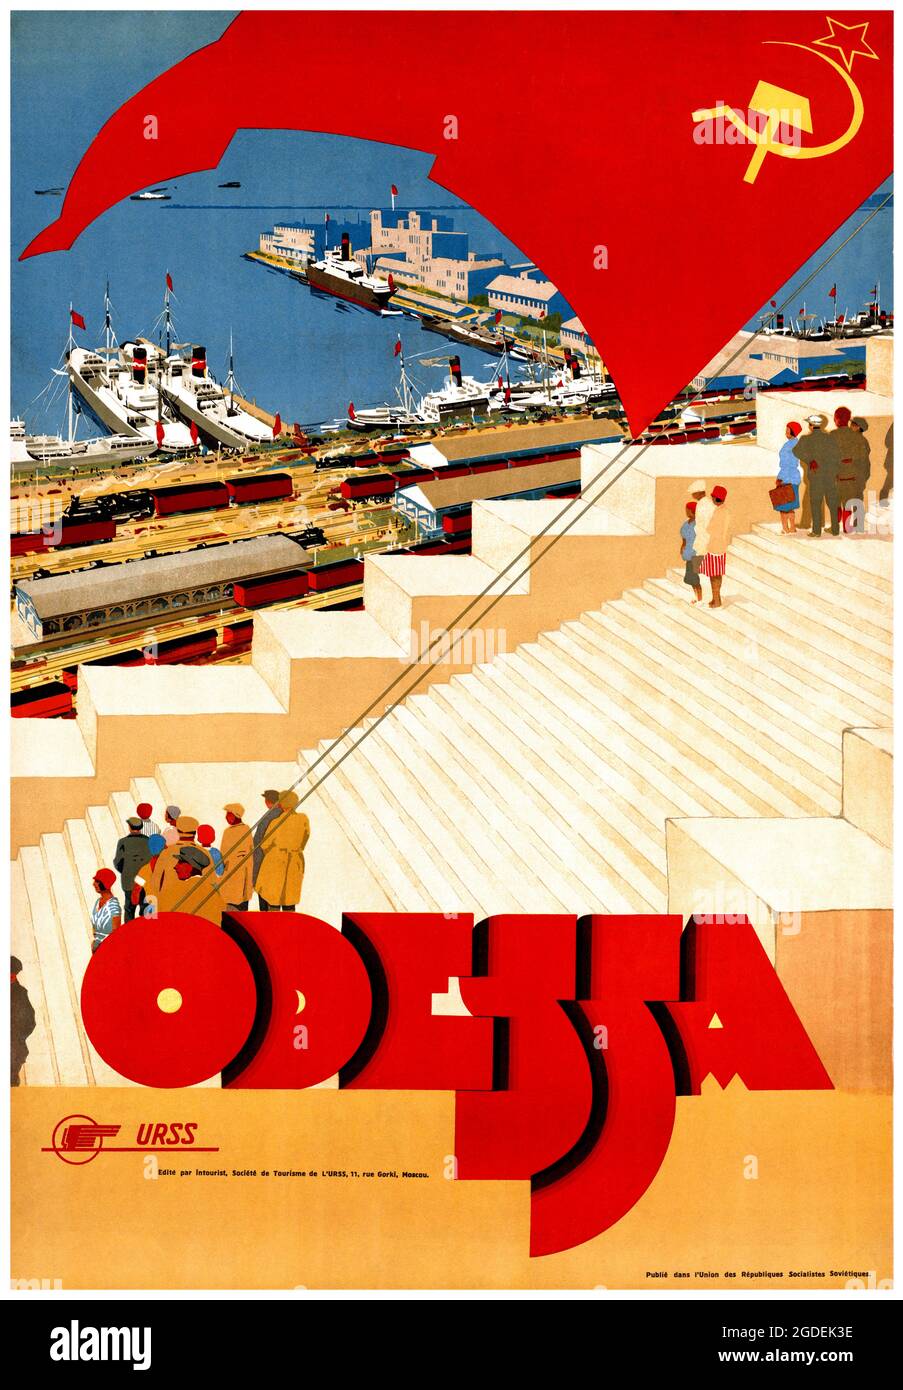 Odessa. Artist unknown. Restored vintage poster published in the 1936 in the USSR. Stock Photo